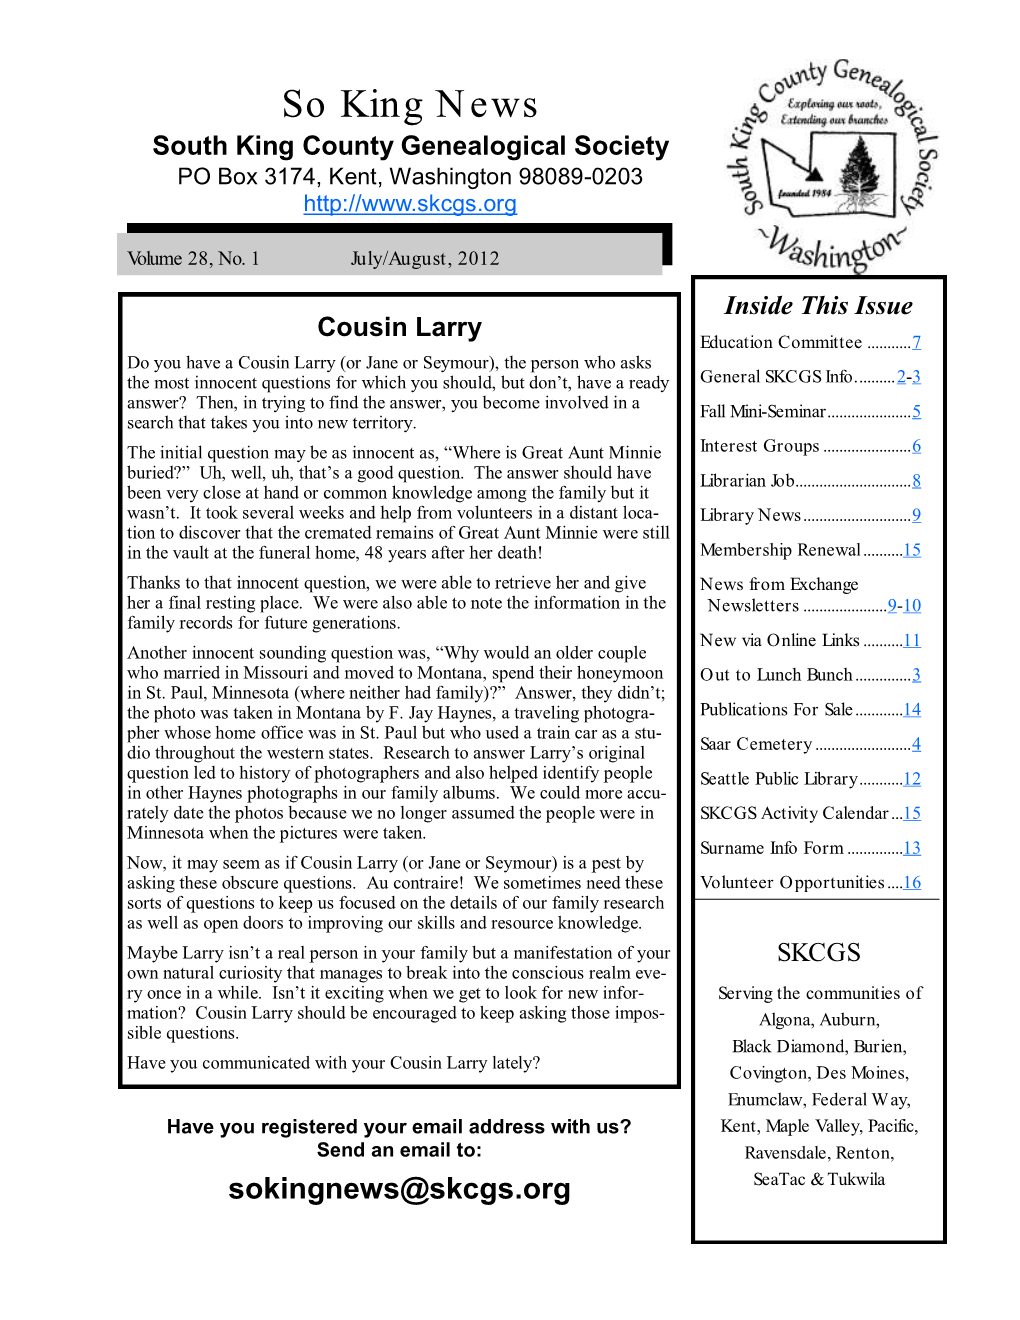 South King County Genealogical Society Newsletter